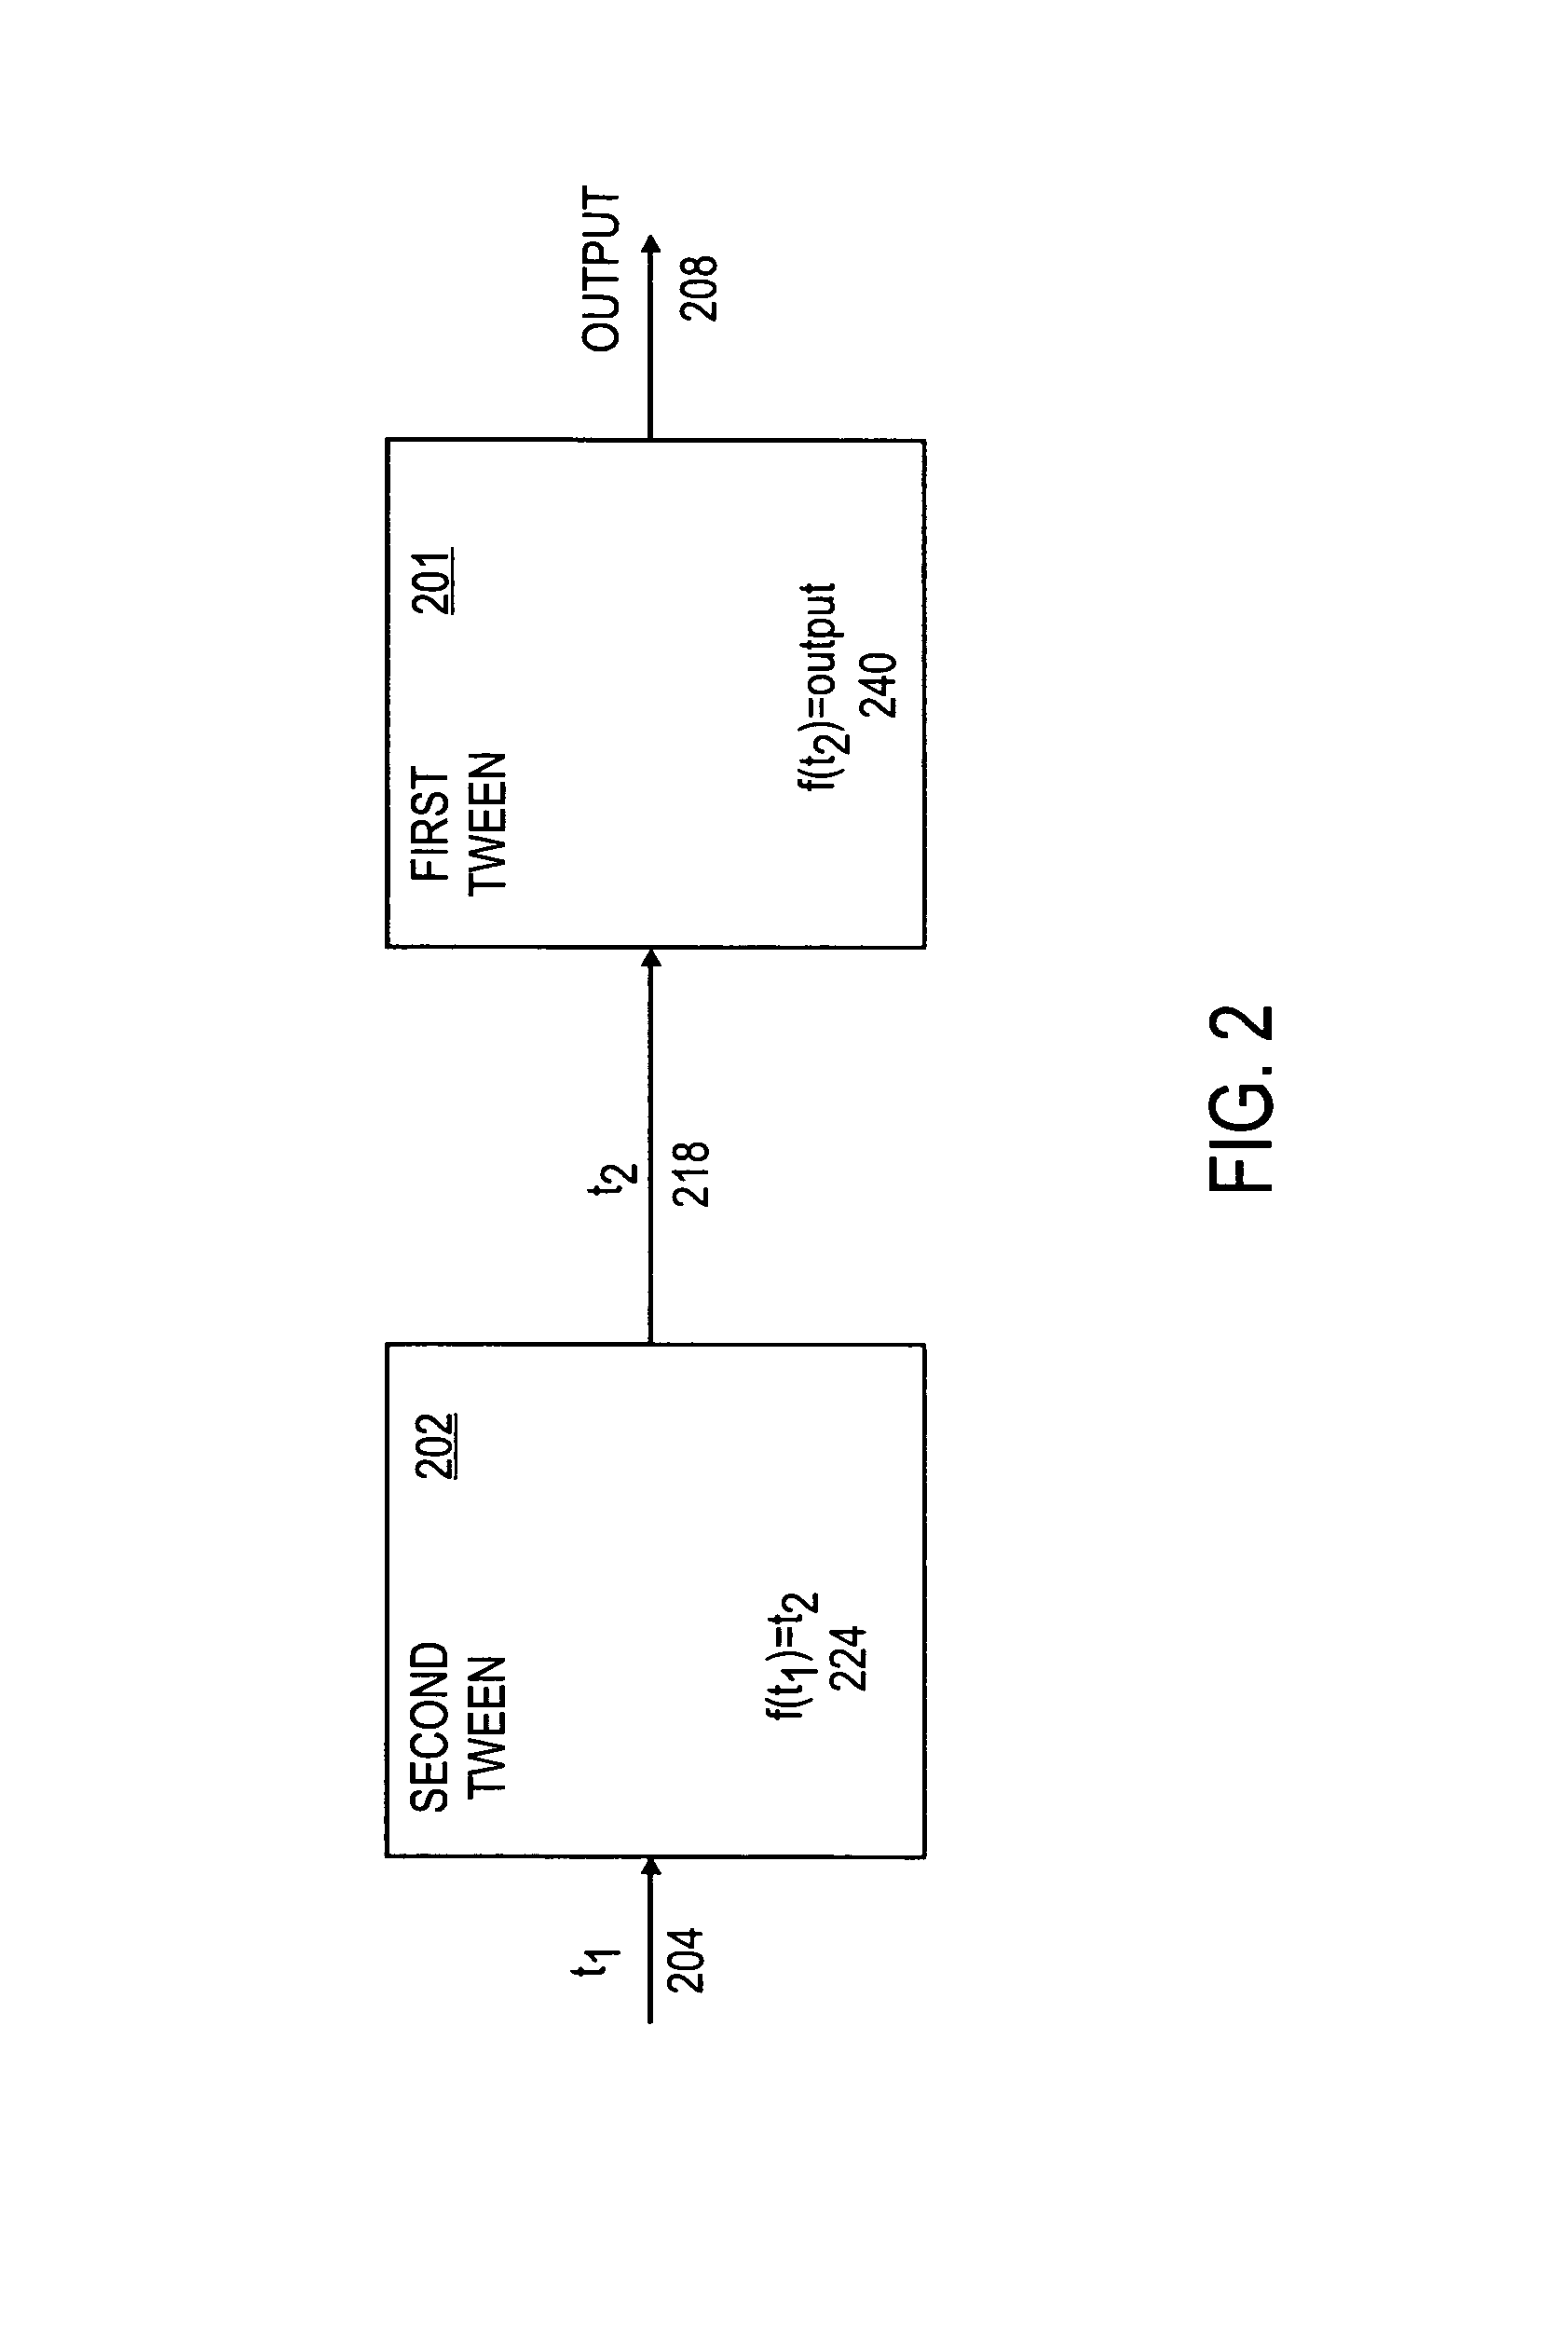 Method and apparatus for chaining two or more tweens to provide non-linear multimedia effects